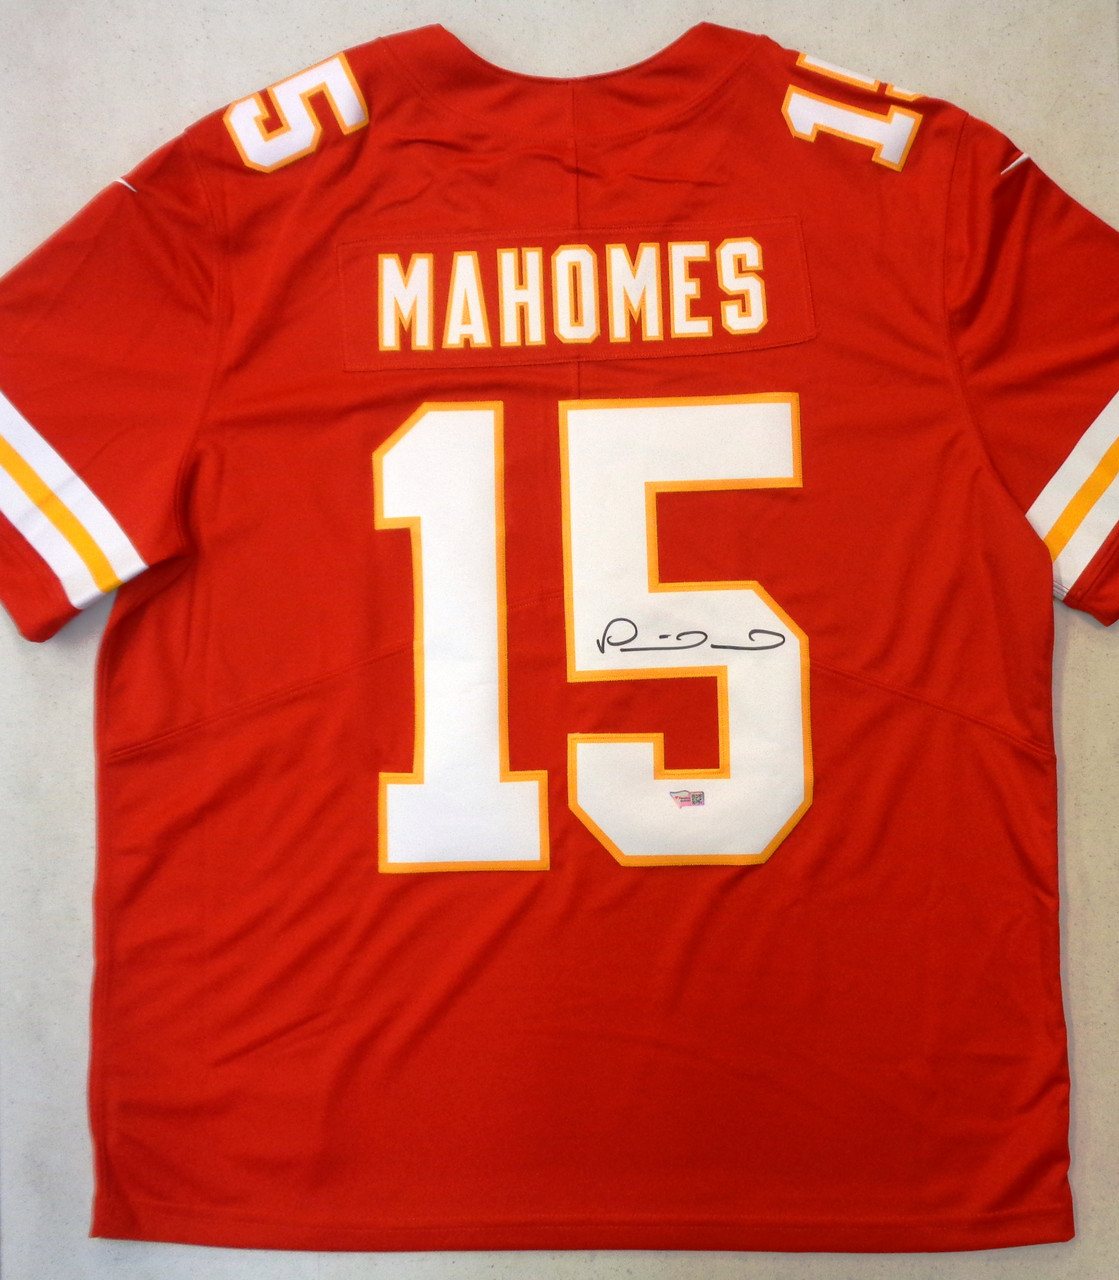 patrick mahomes jersey autographed